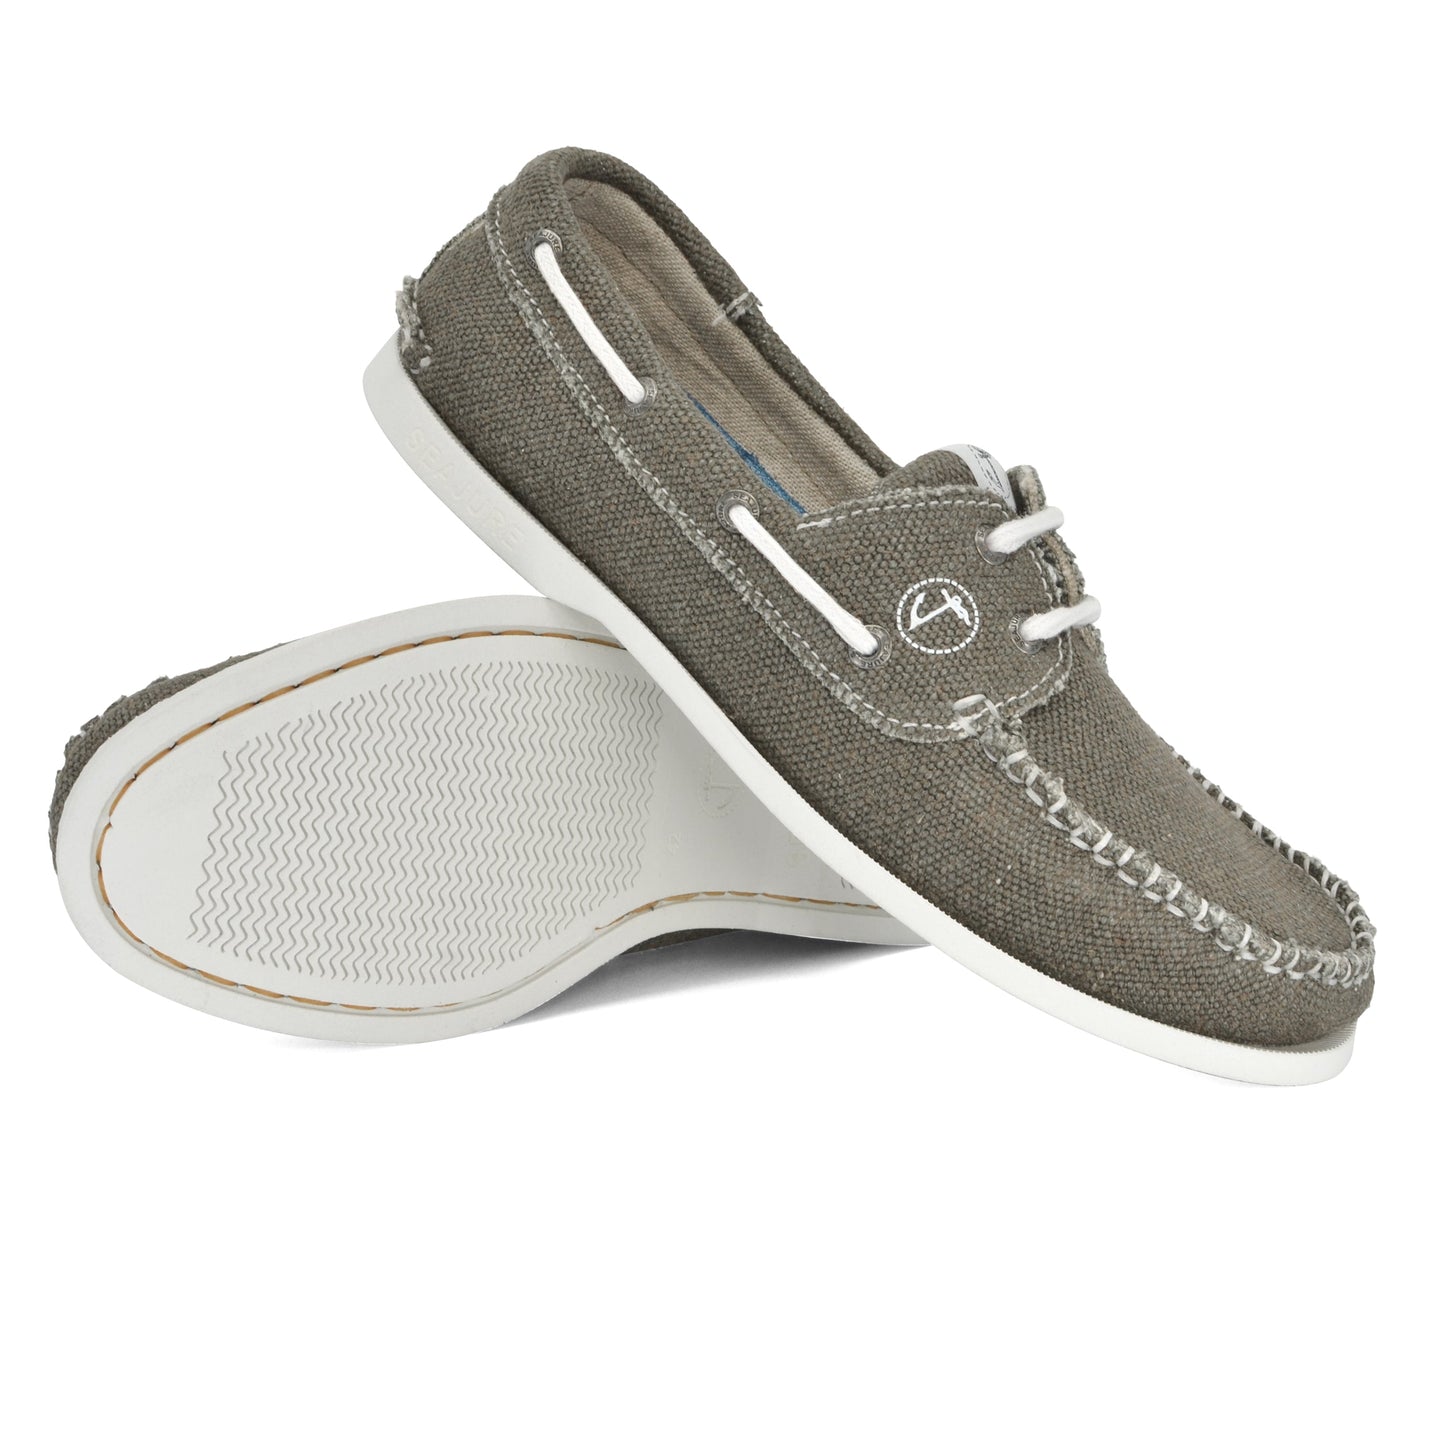 A pair of gray Amethyst Hestia Men Hemp & Vegan Boat Shoe Scopello crafted with premium hemp and featuring white natural rubber soles, white laces, and visible stitching is shown, one shoe resting on top of the other.